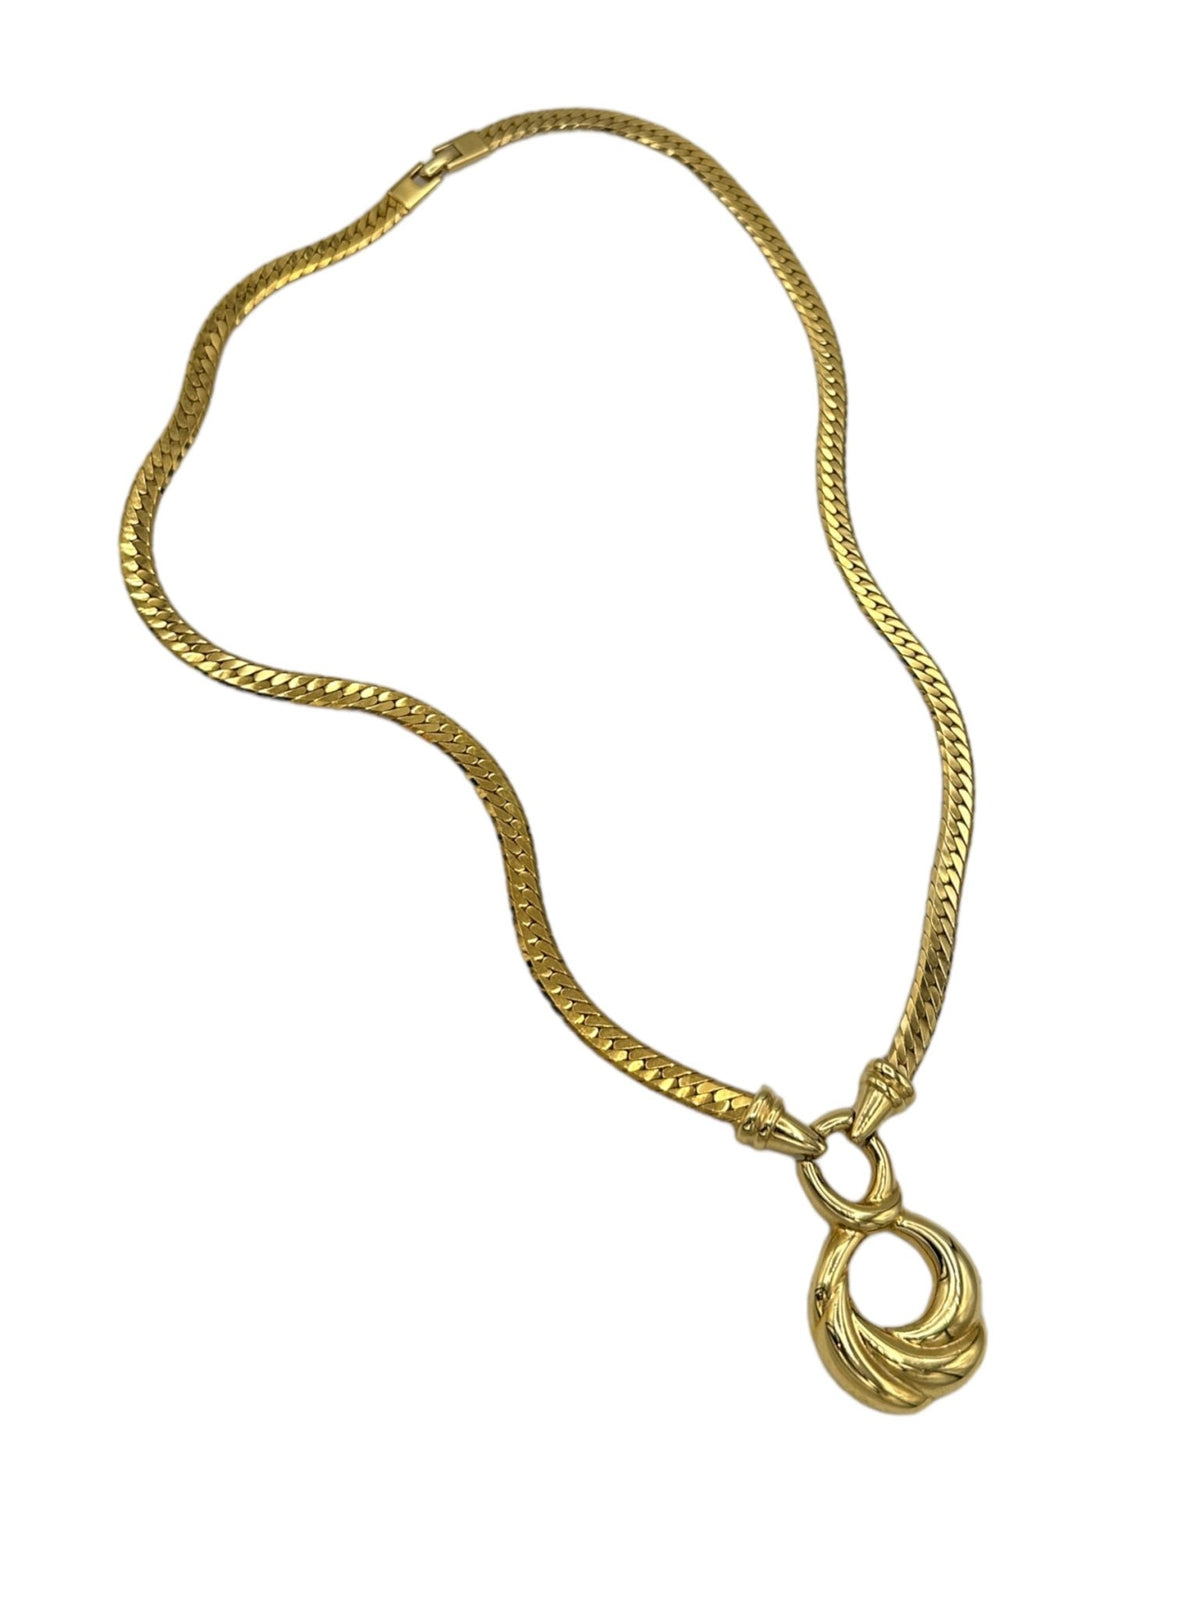 Napier Long Gold Curb Chain Circle Swirl Vintage Pendant - 24 Wishes Vintage Jewelry